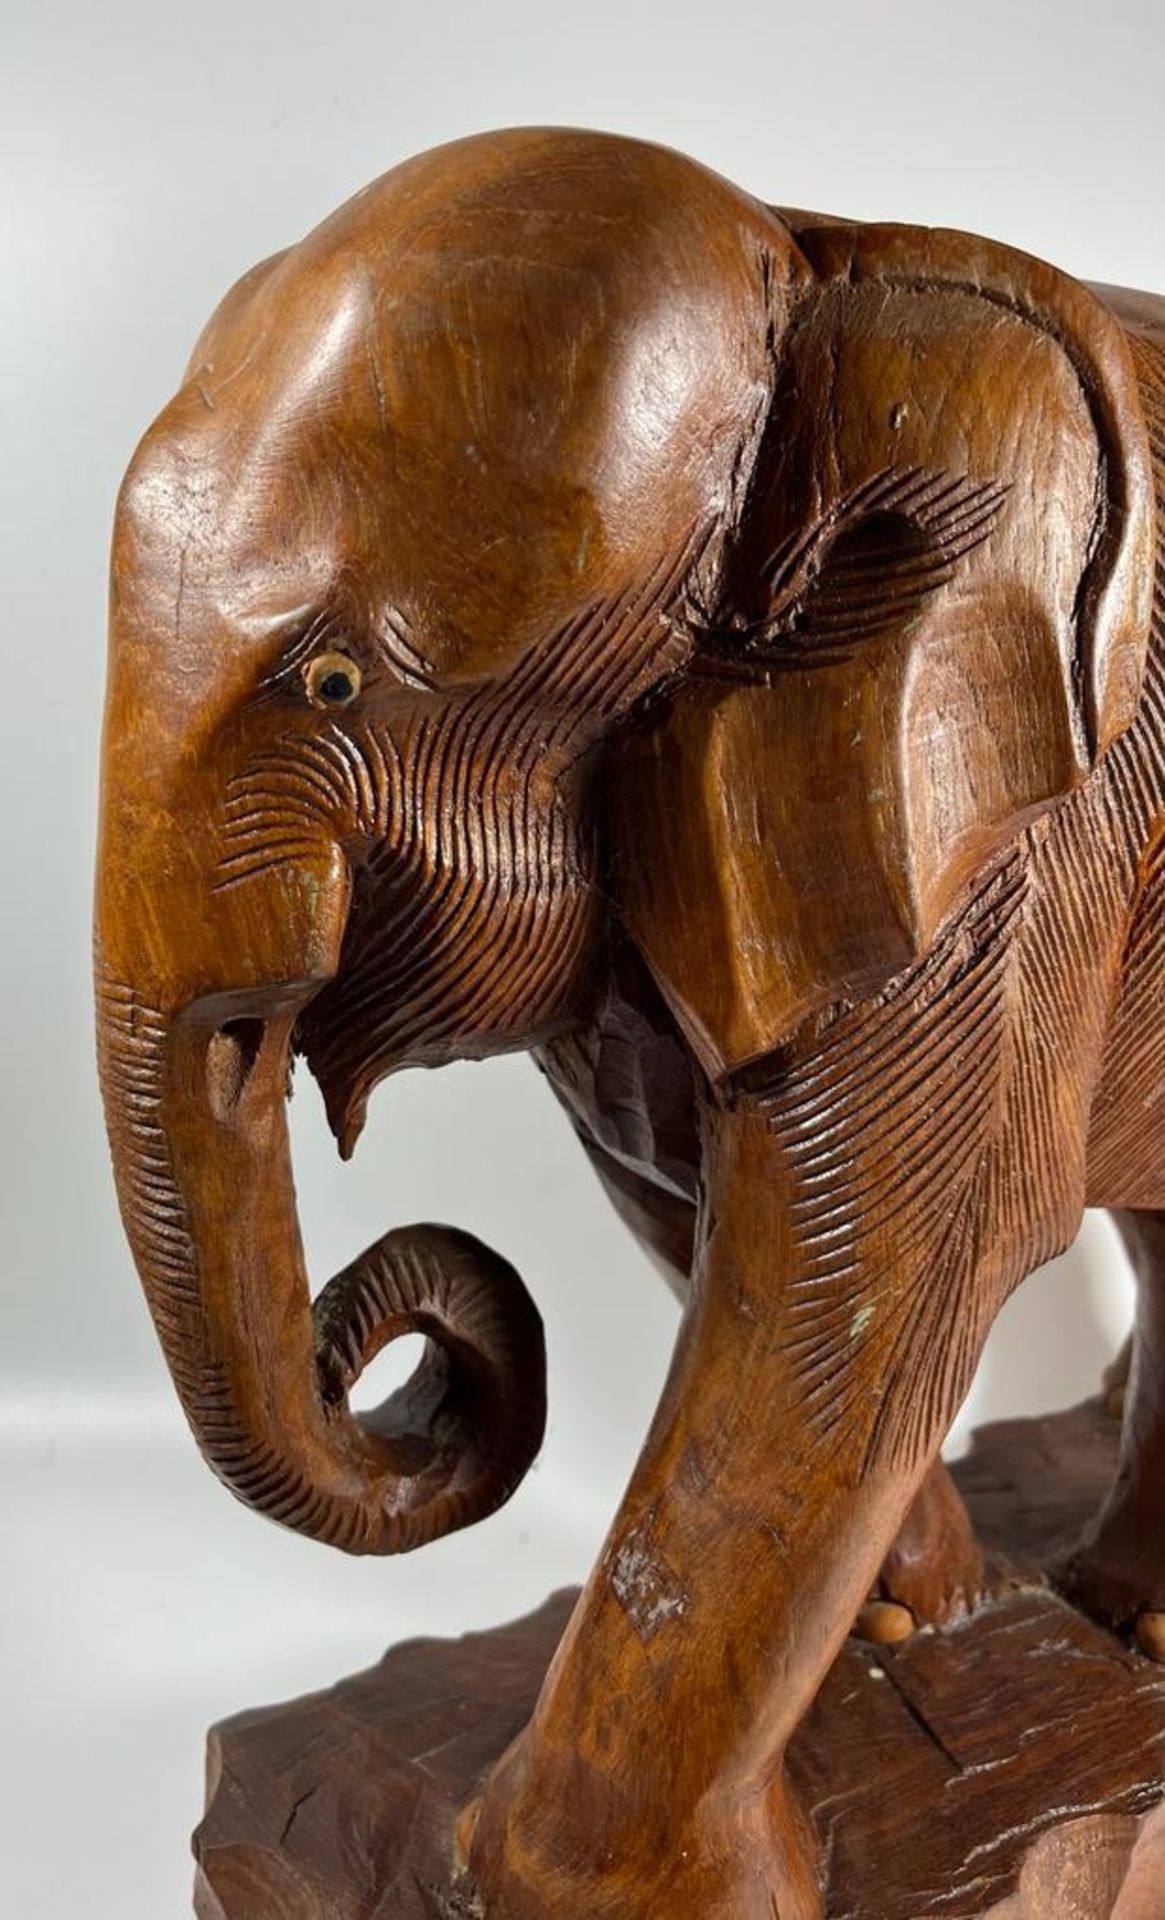 A LARGE AND HEAVY VINTAGE CARVED SOLID TEAK ELEPHANT MODEL, LIKELY CARVED FROM ONE PIECE OF TEAK - Image 2 of 10